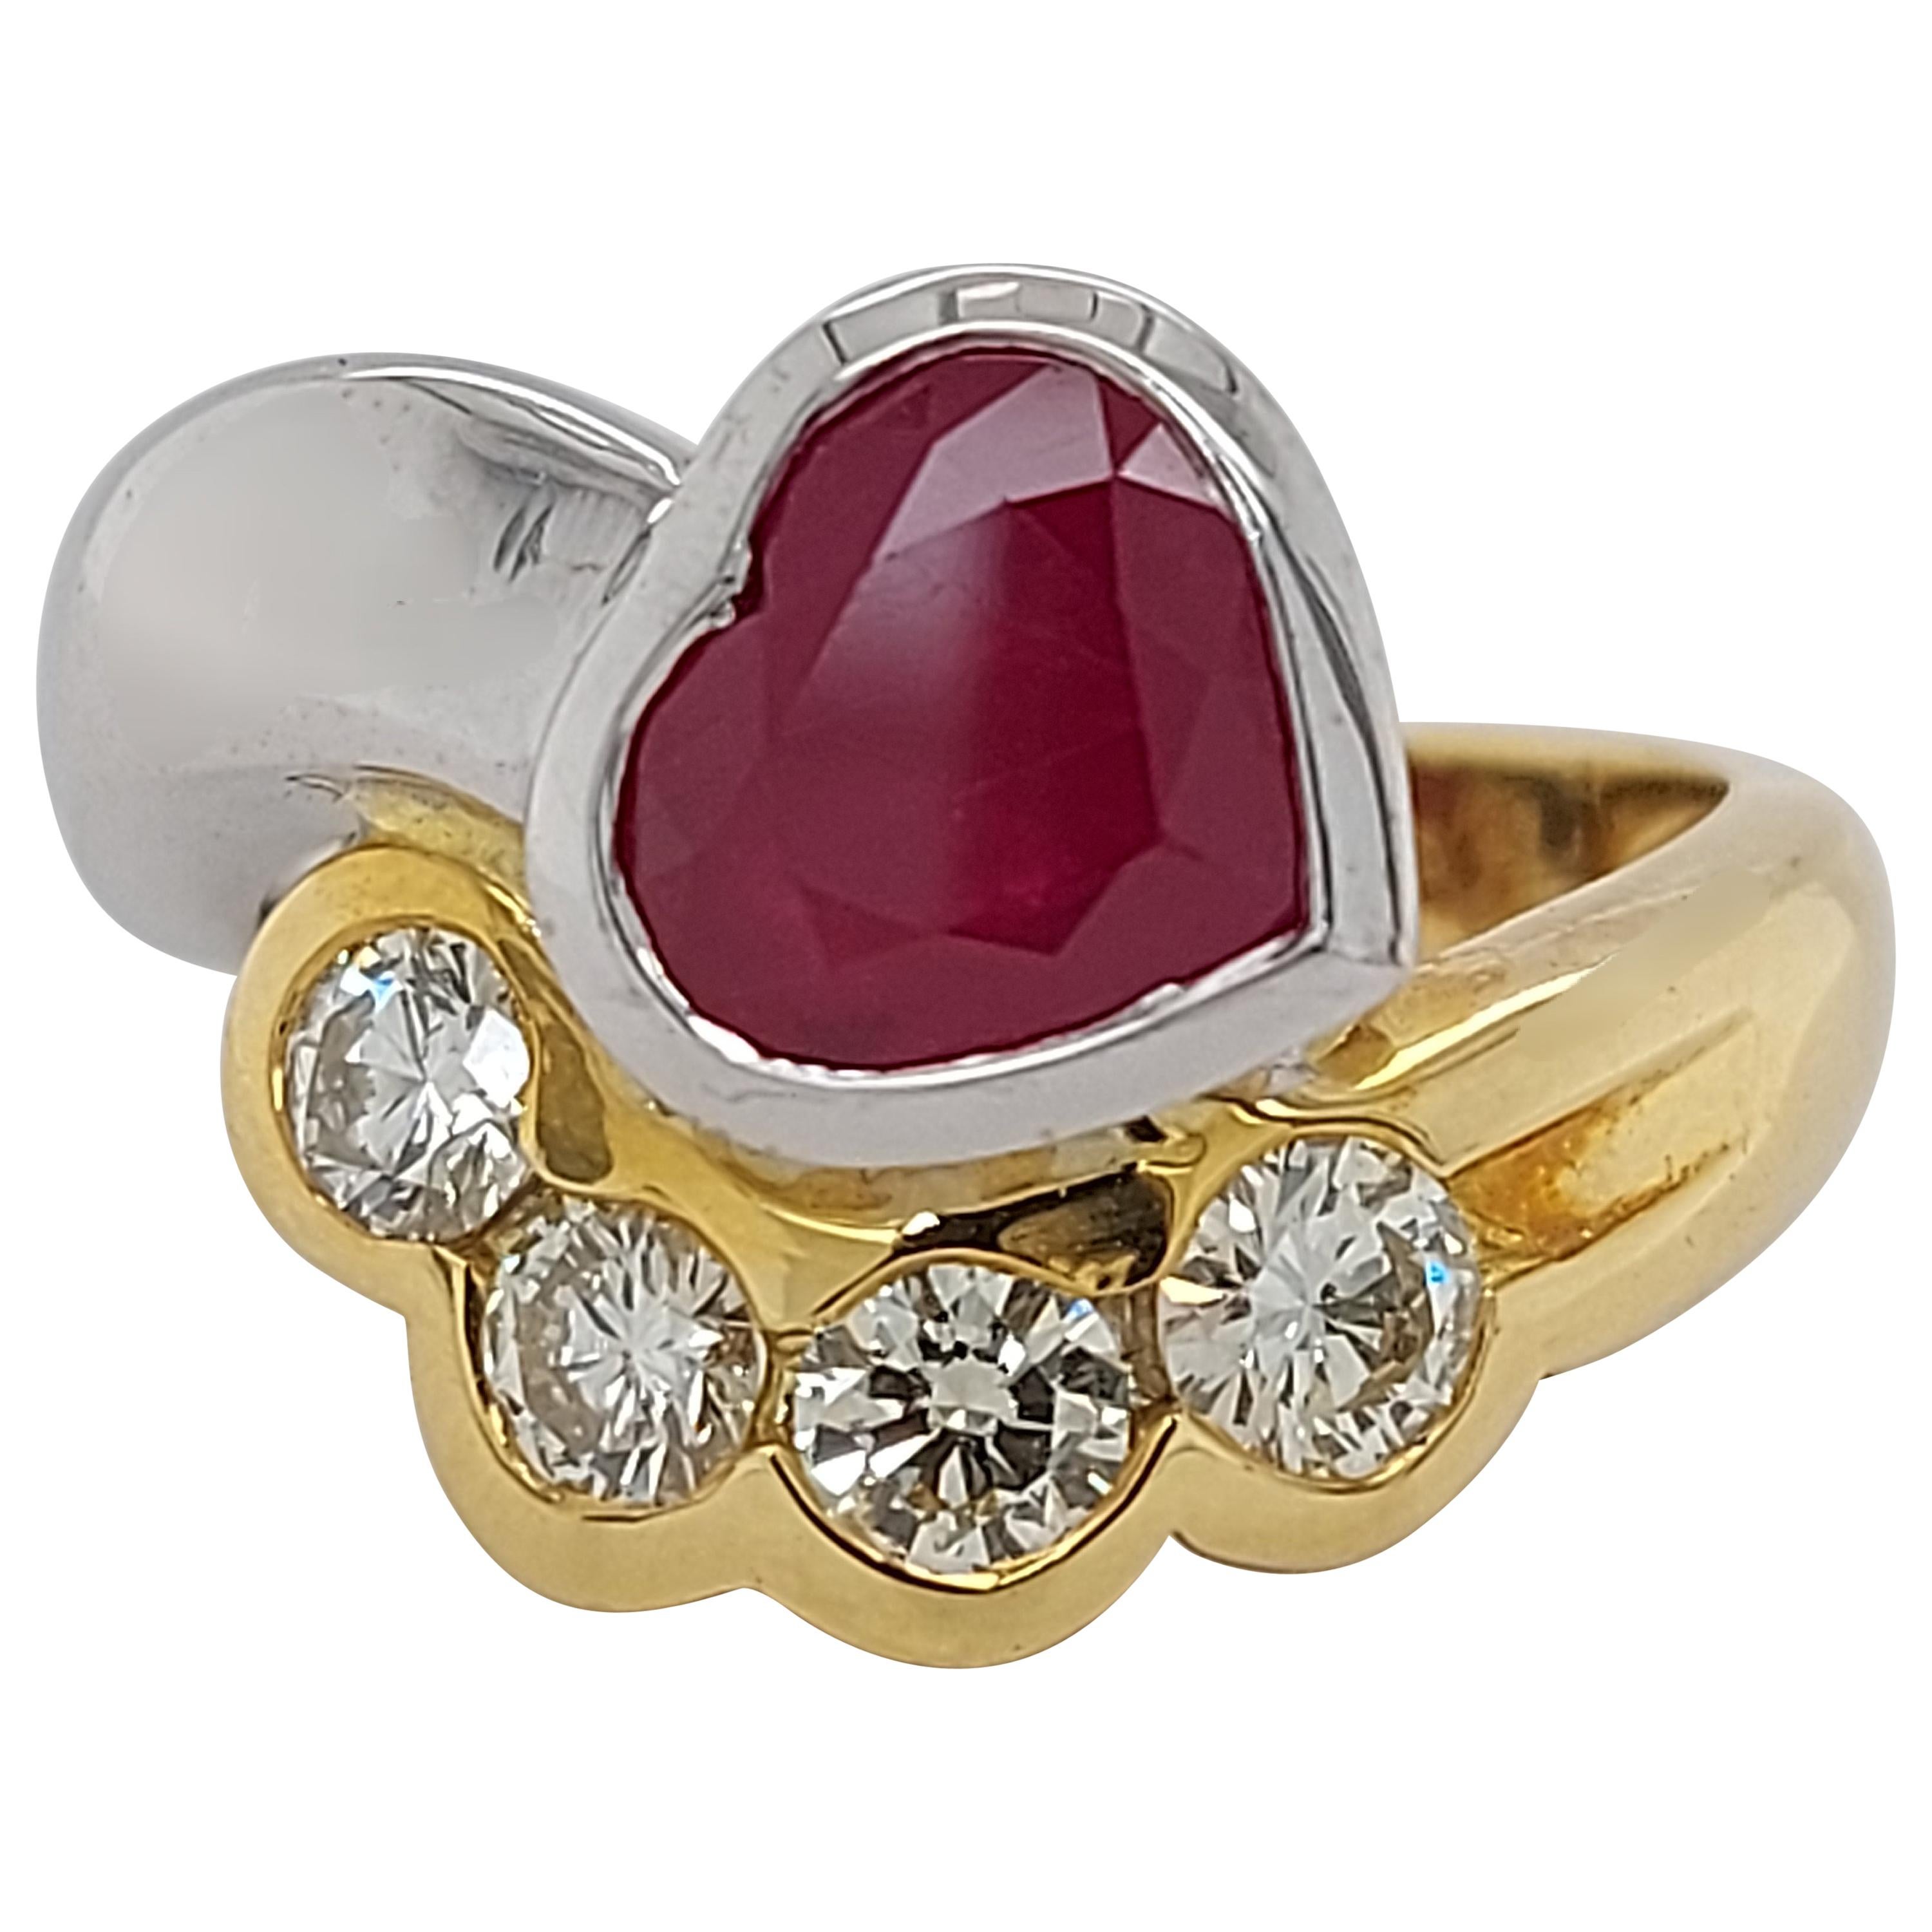 Beautiful 18kt Yellow and White Gold Ring with 4 Diamonds and Heart Shaped Ruby